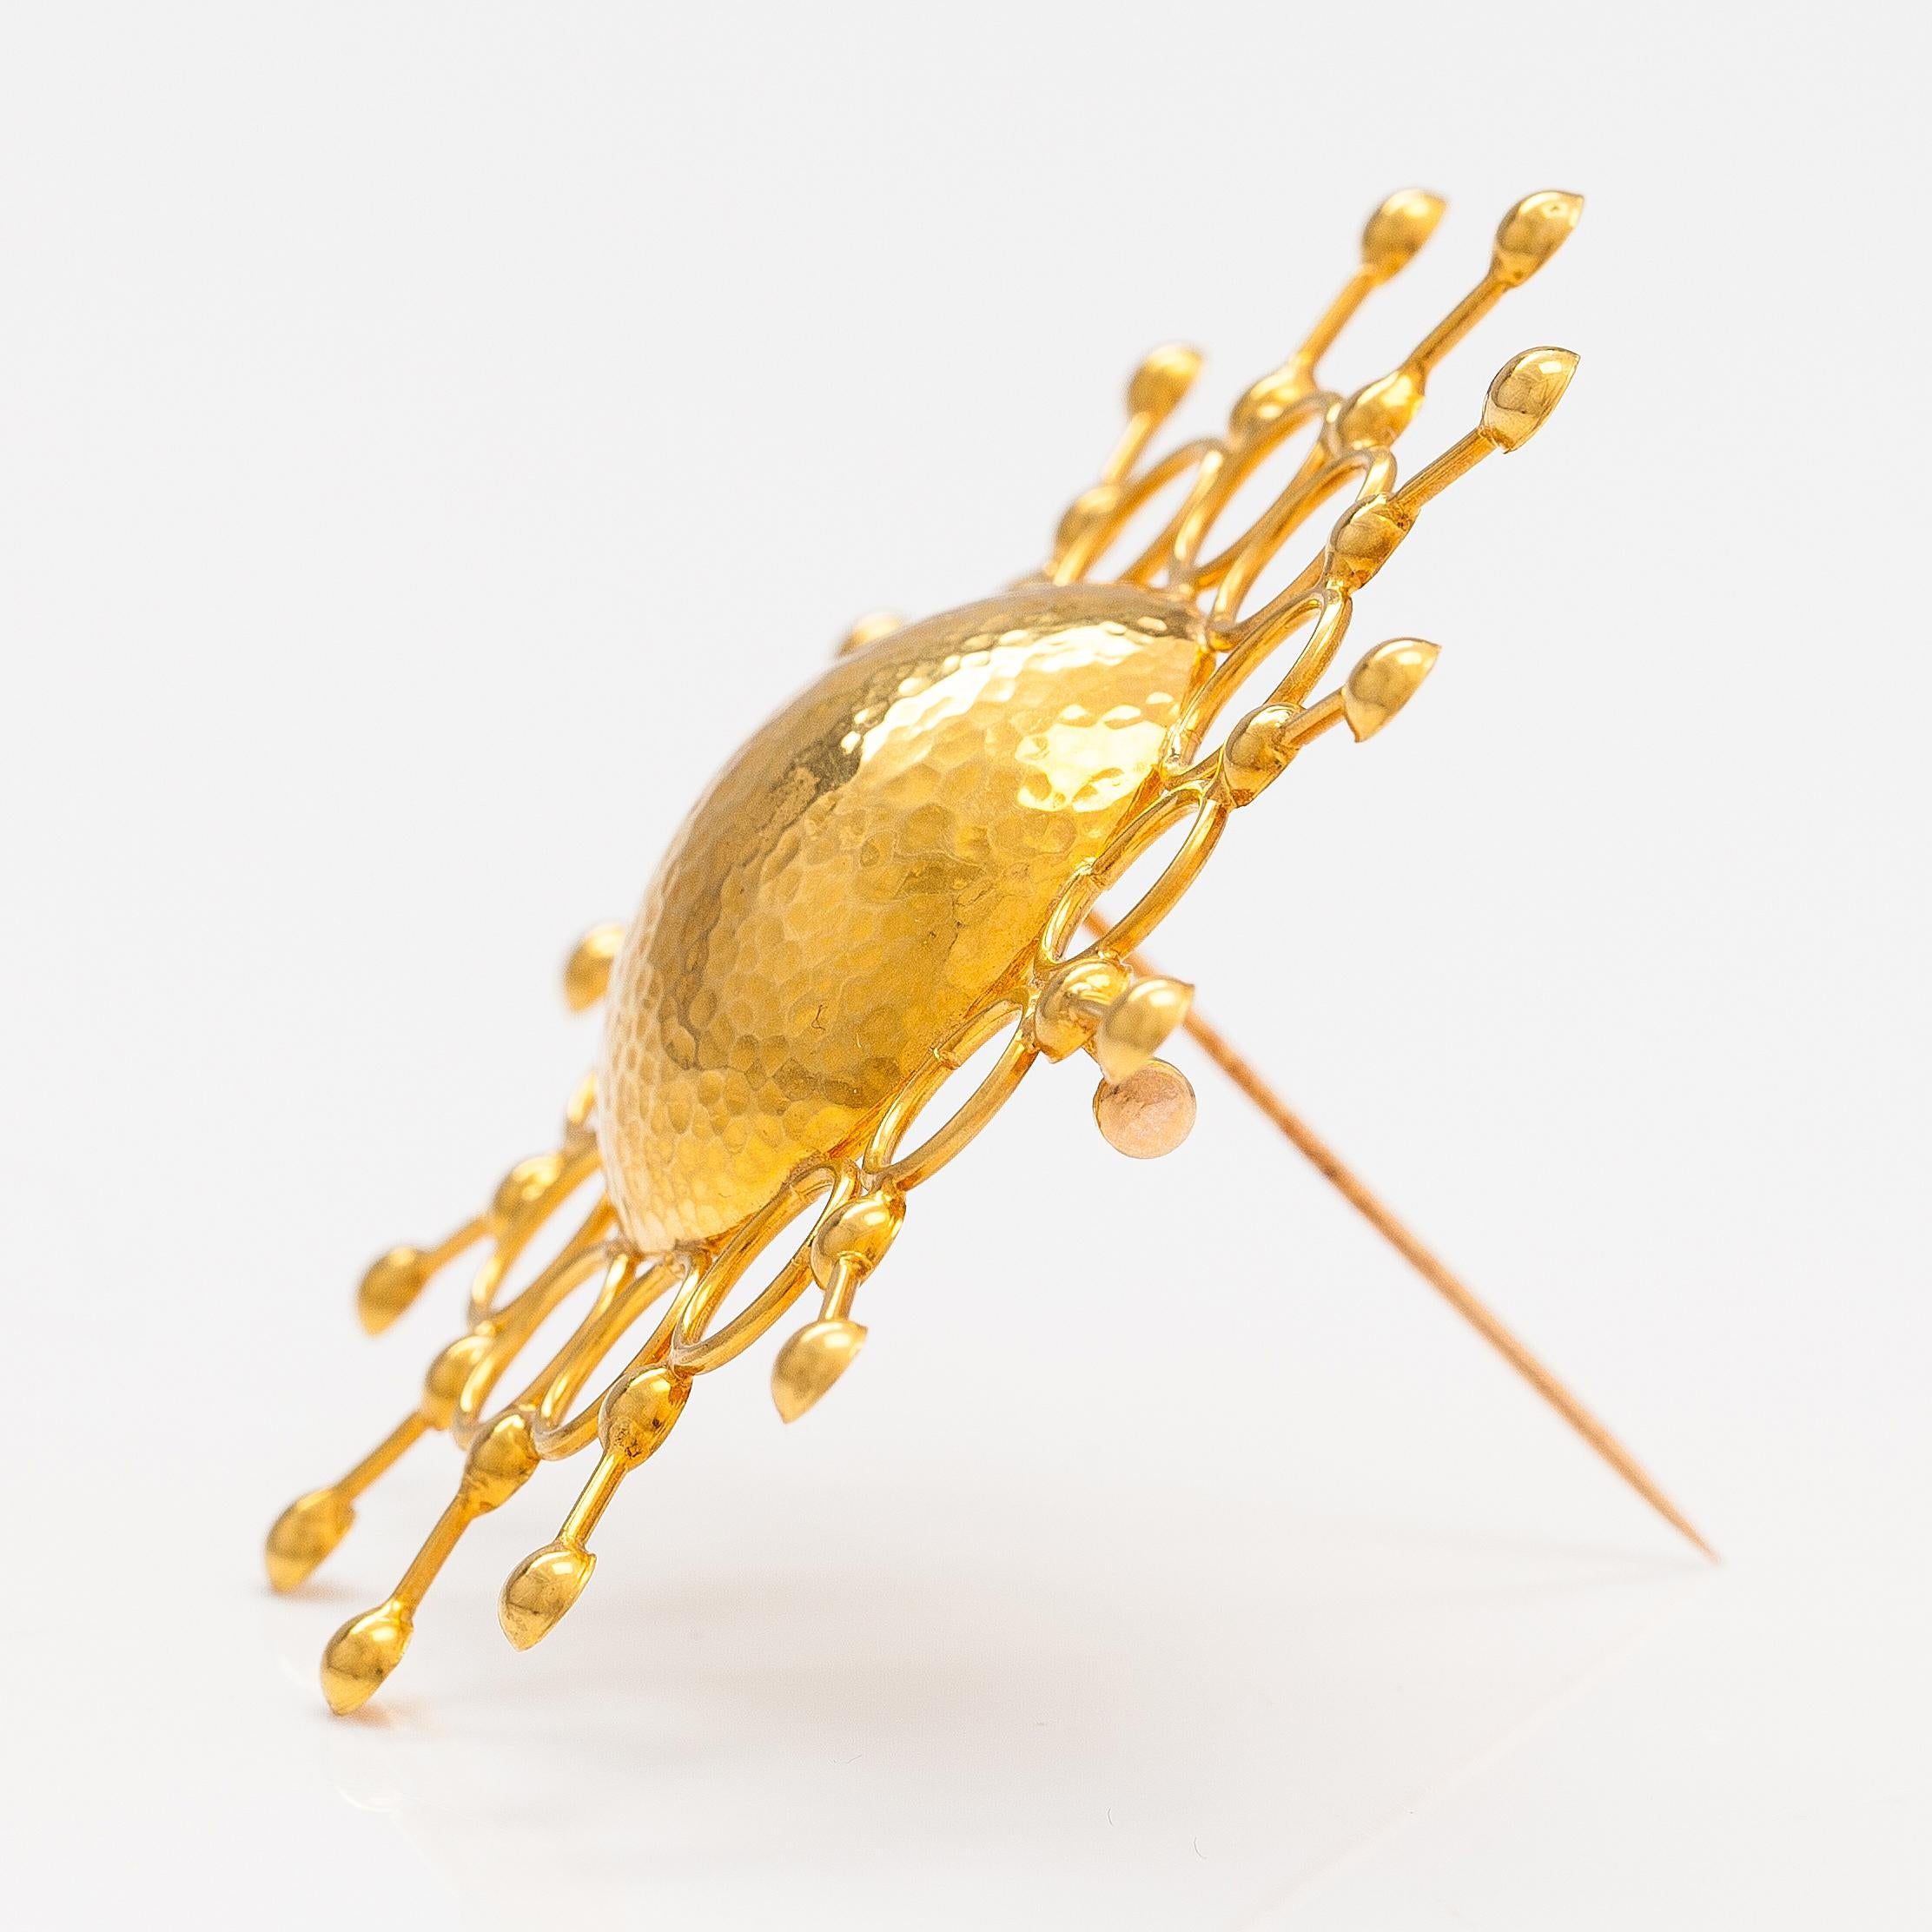 Gold brooch made by Nilo Westerback in 1970. Weight is 11.3g of 14k gold. 
Nilo Westerback is a jewelry store in Helsinki. This brooch was designed by someone but unfortunately the designer is unknown.